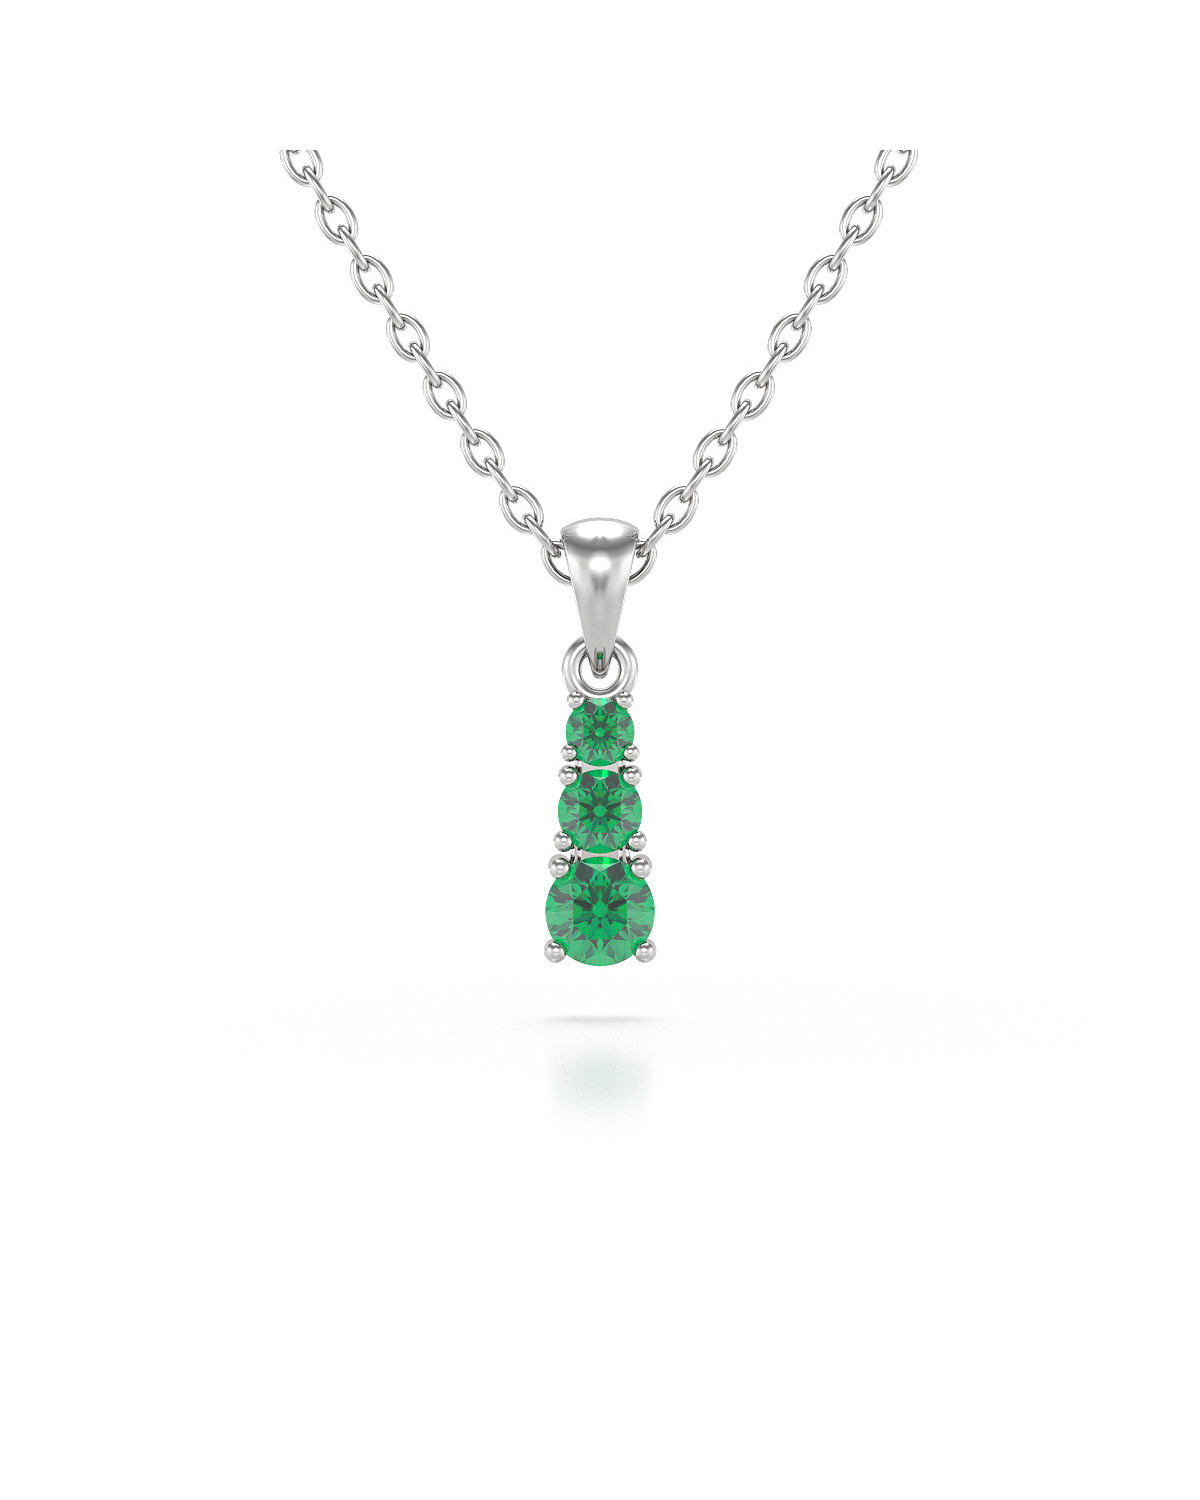 14K Gold Emerald Necklace Pendant Gold Chain included